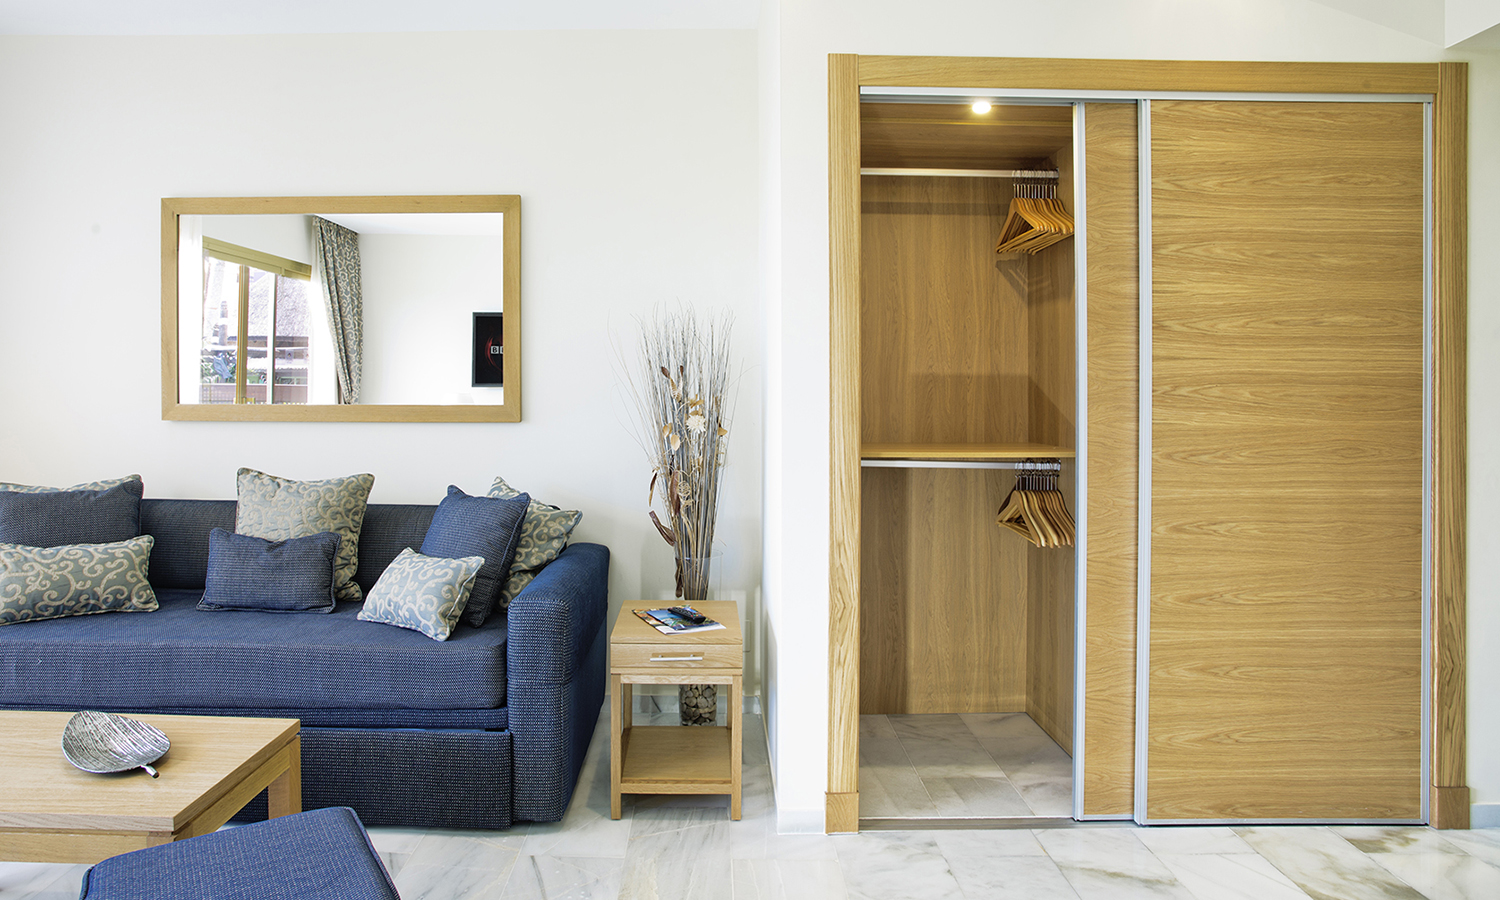 Wardrobe: Built-in wardrobe with sliding doors, and without skirting, so access is level with main floor